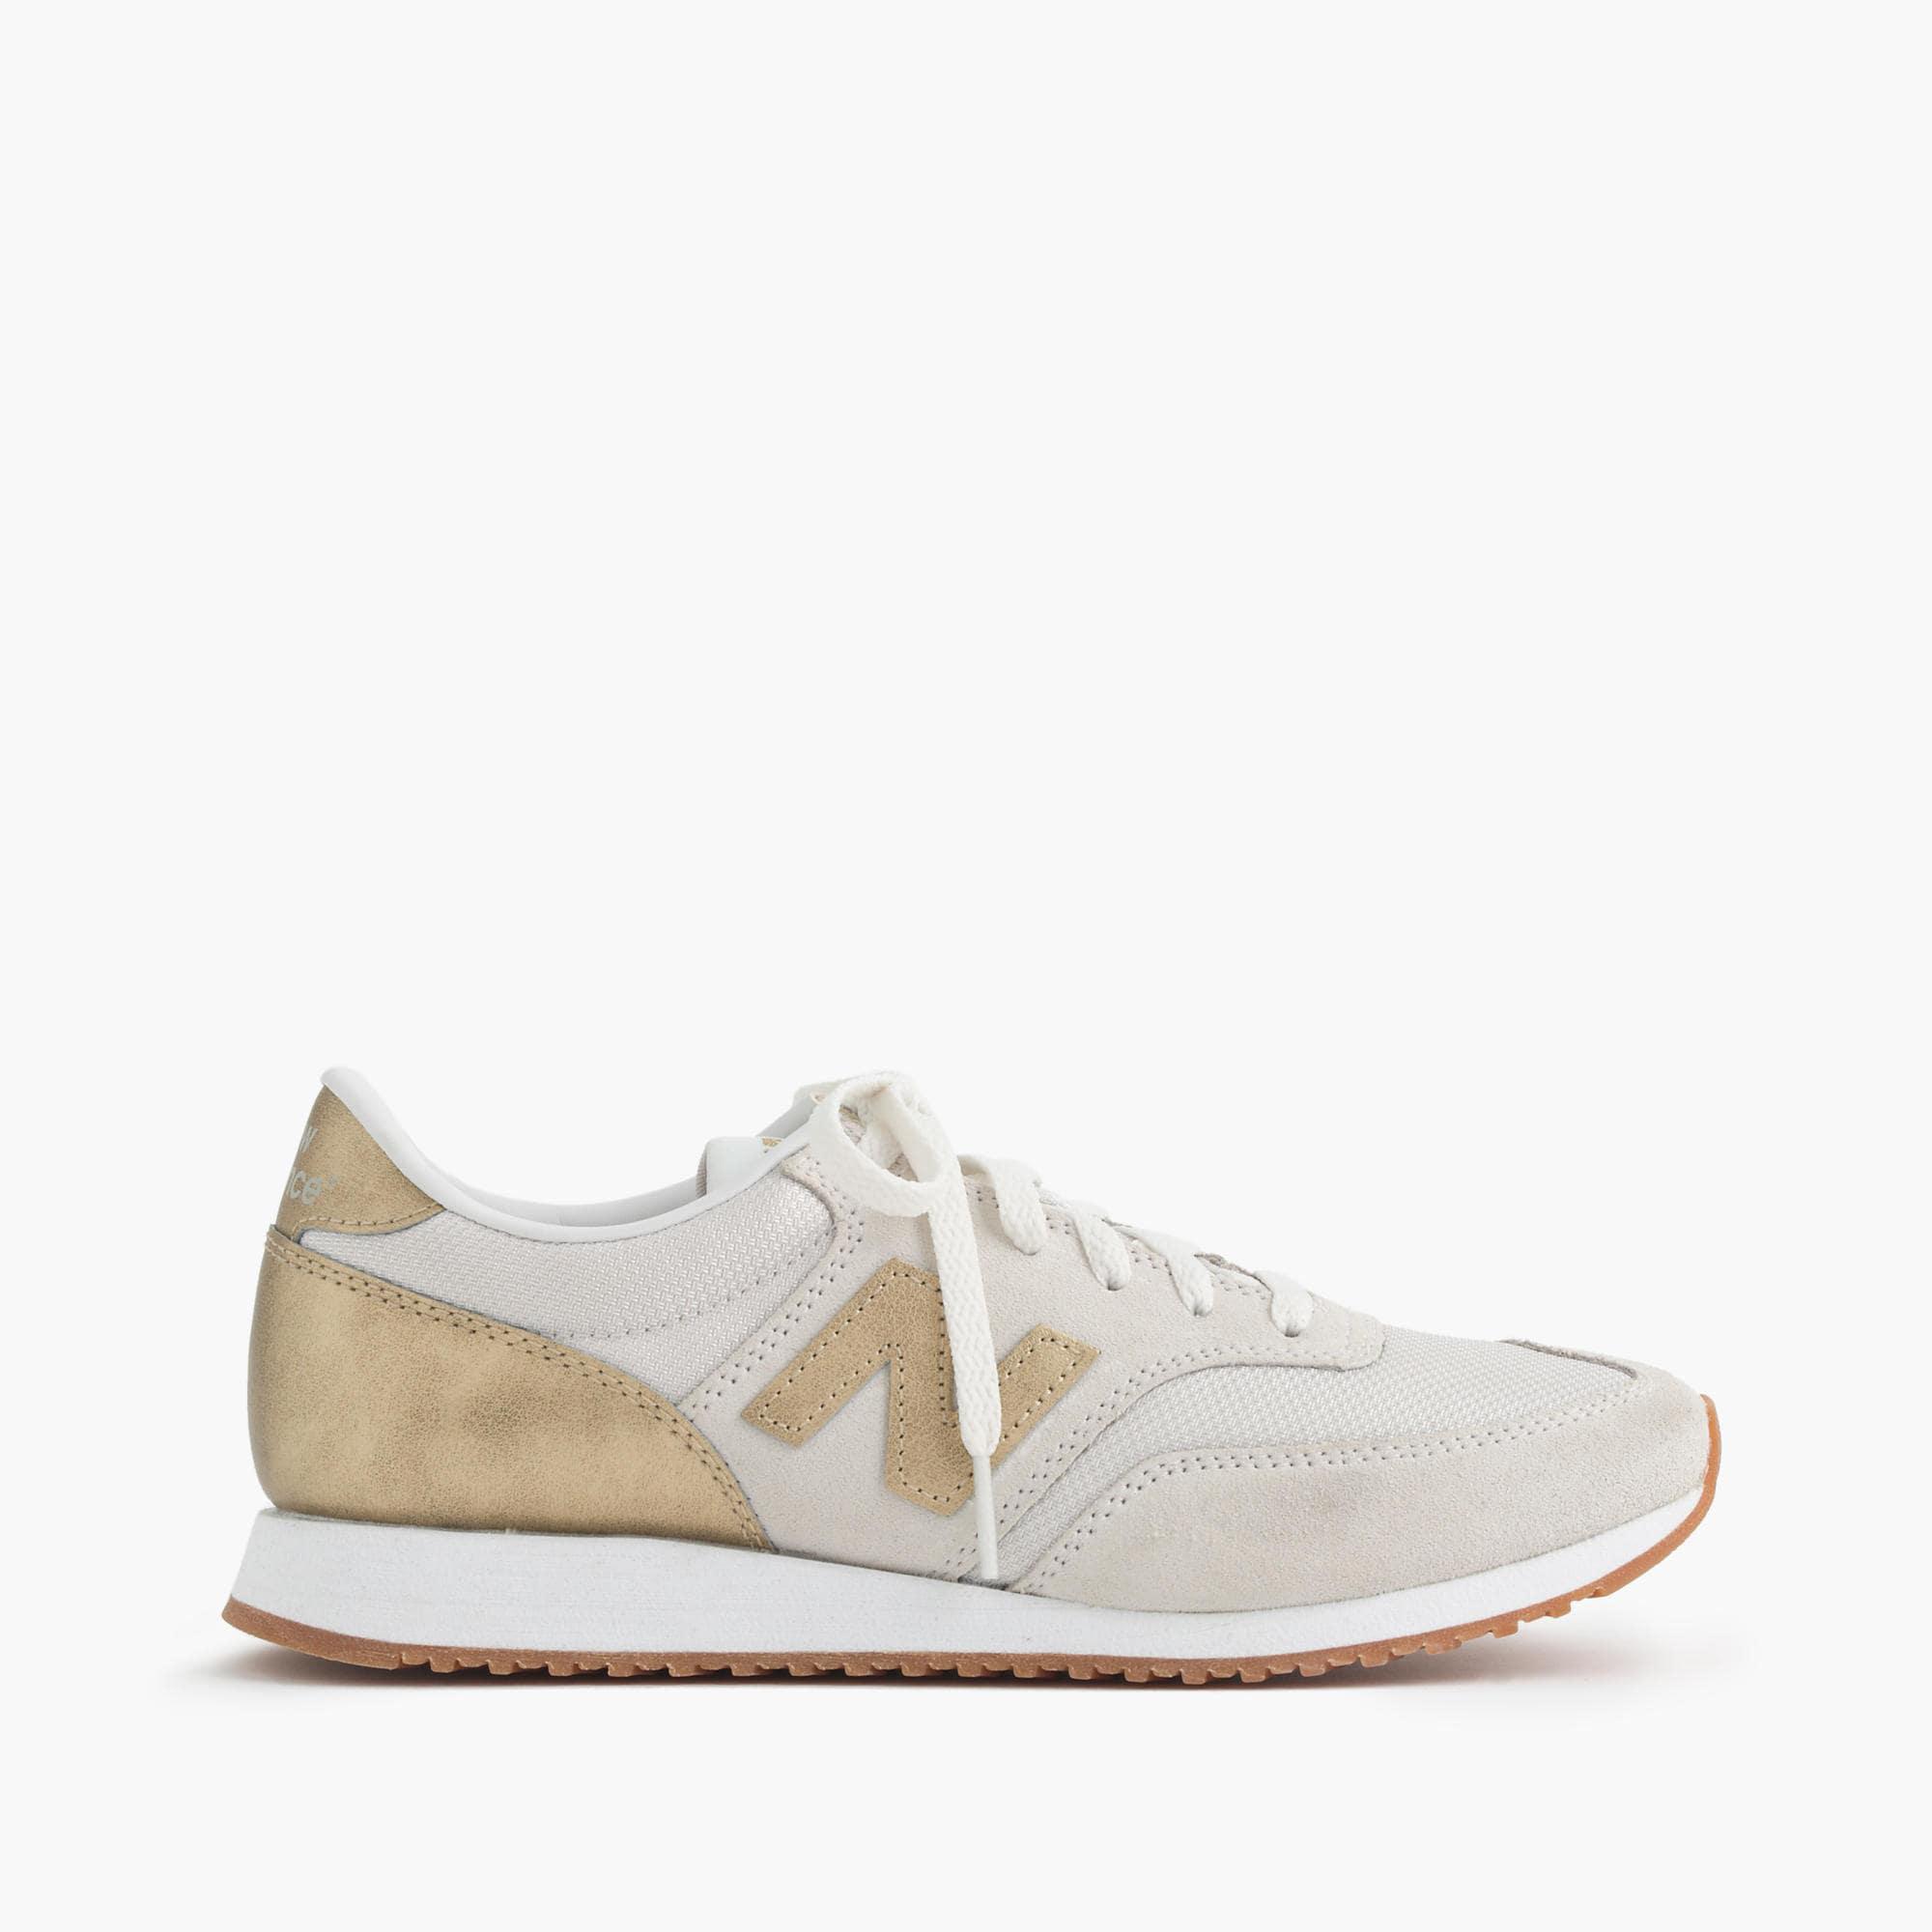 J.Crew New Balance and Leather 620 Sneakers in Metallic | Lyst